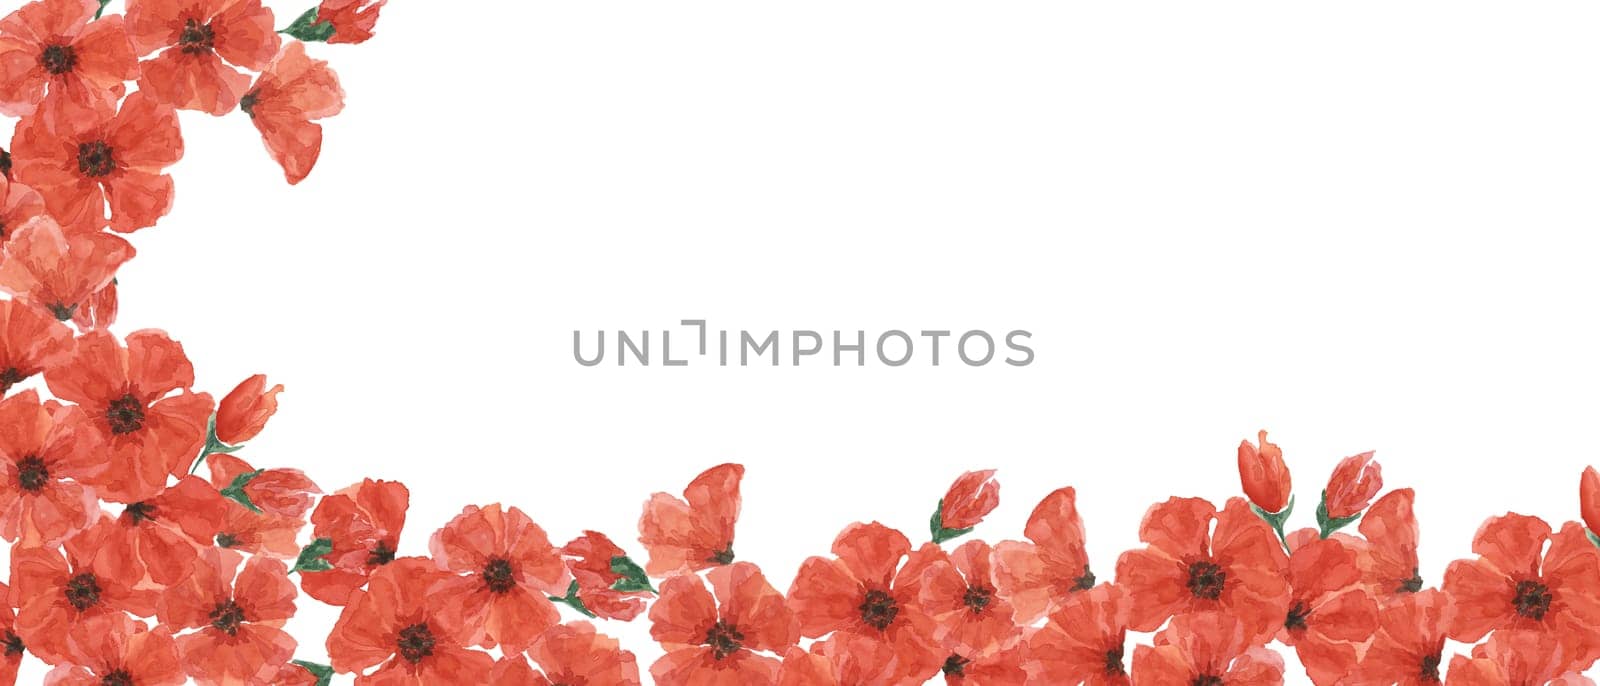 Red poppies web template banner. Poppy day flower compositions. Hand drawn watercolor illustration for card, design, commemorative events, US memorial day, Anzac day, flyers, banners, sale